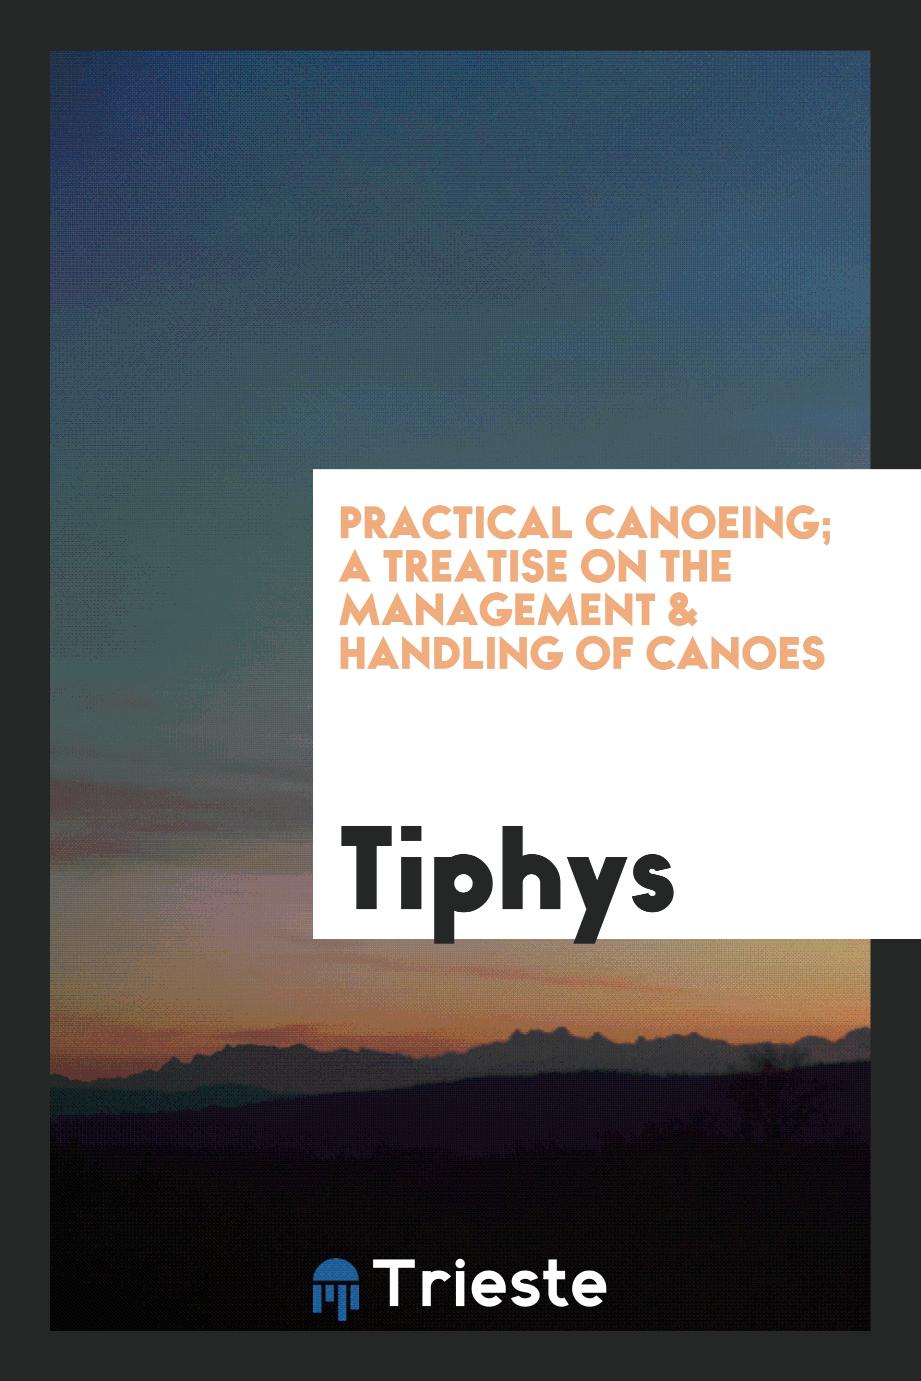 Practical Canoeing; A Treatise on the Management & Handling of Canoes